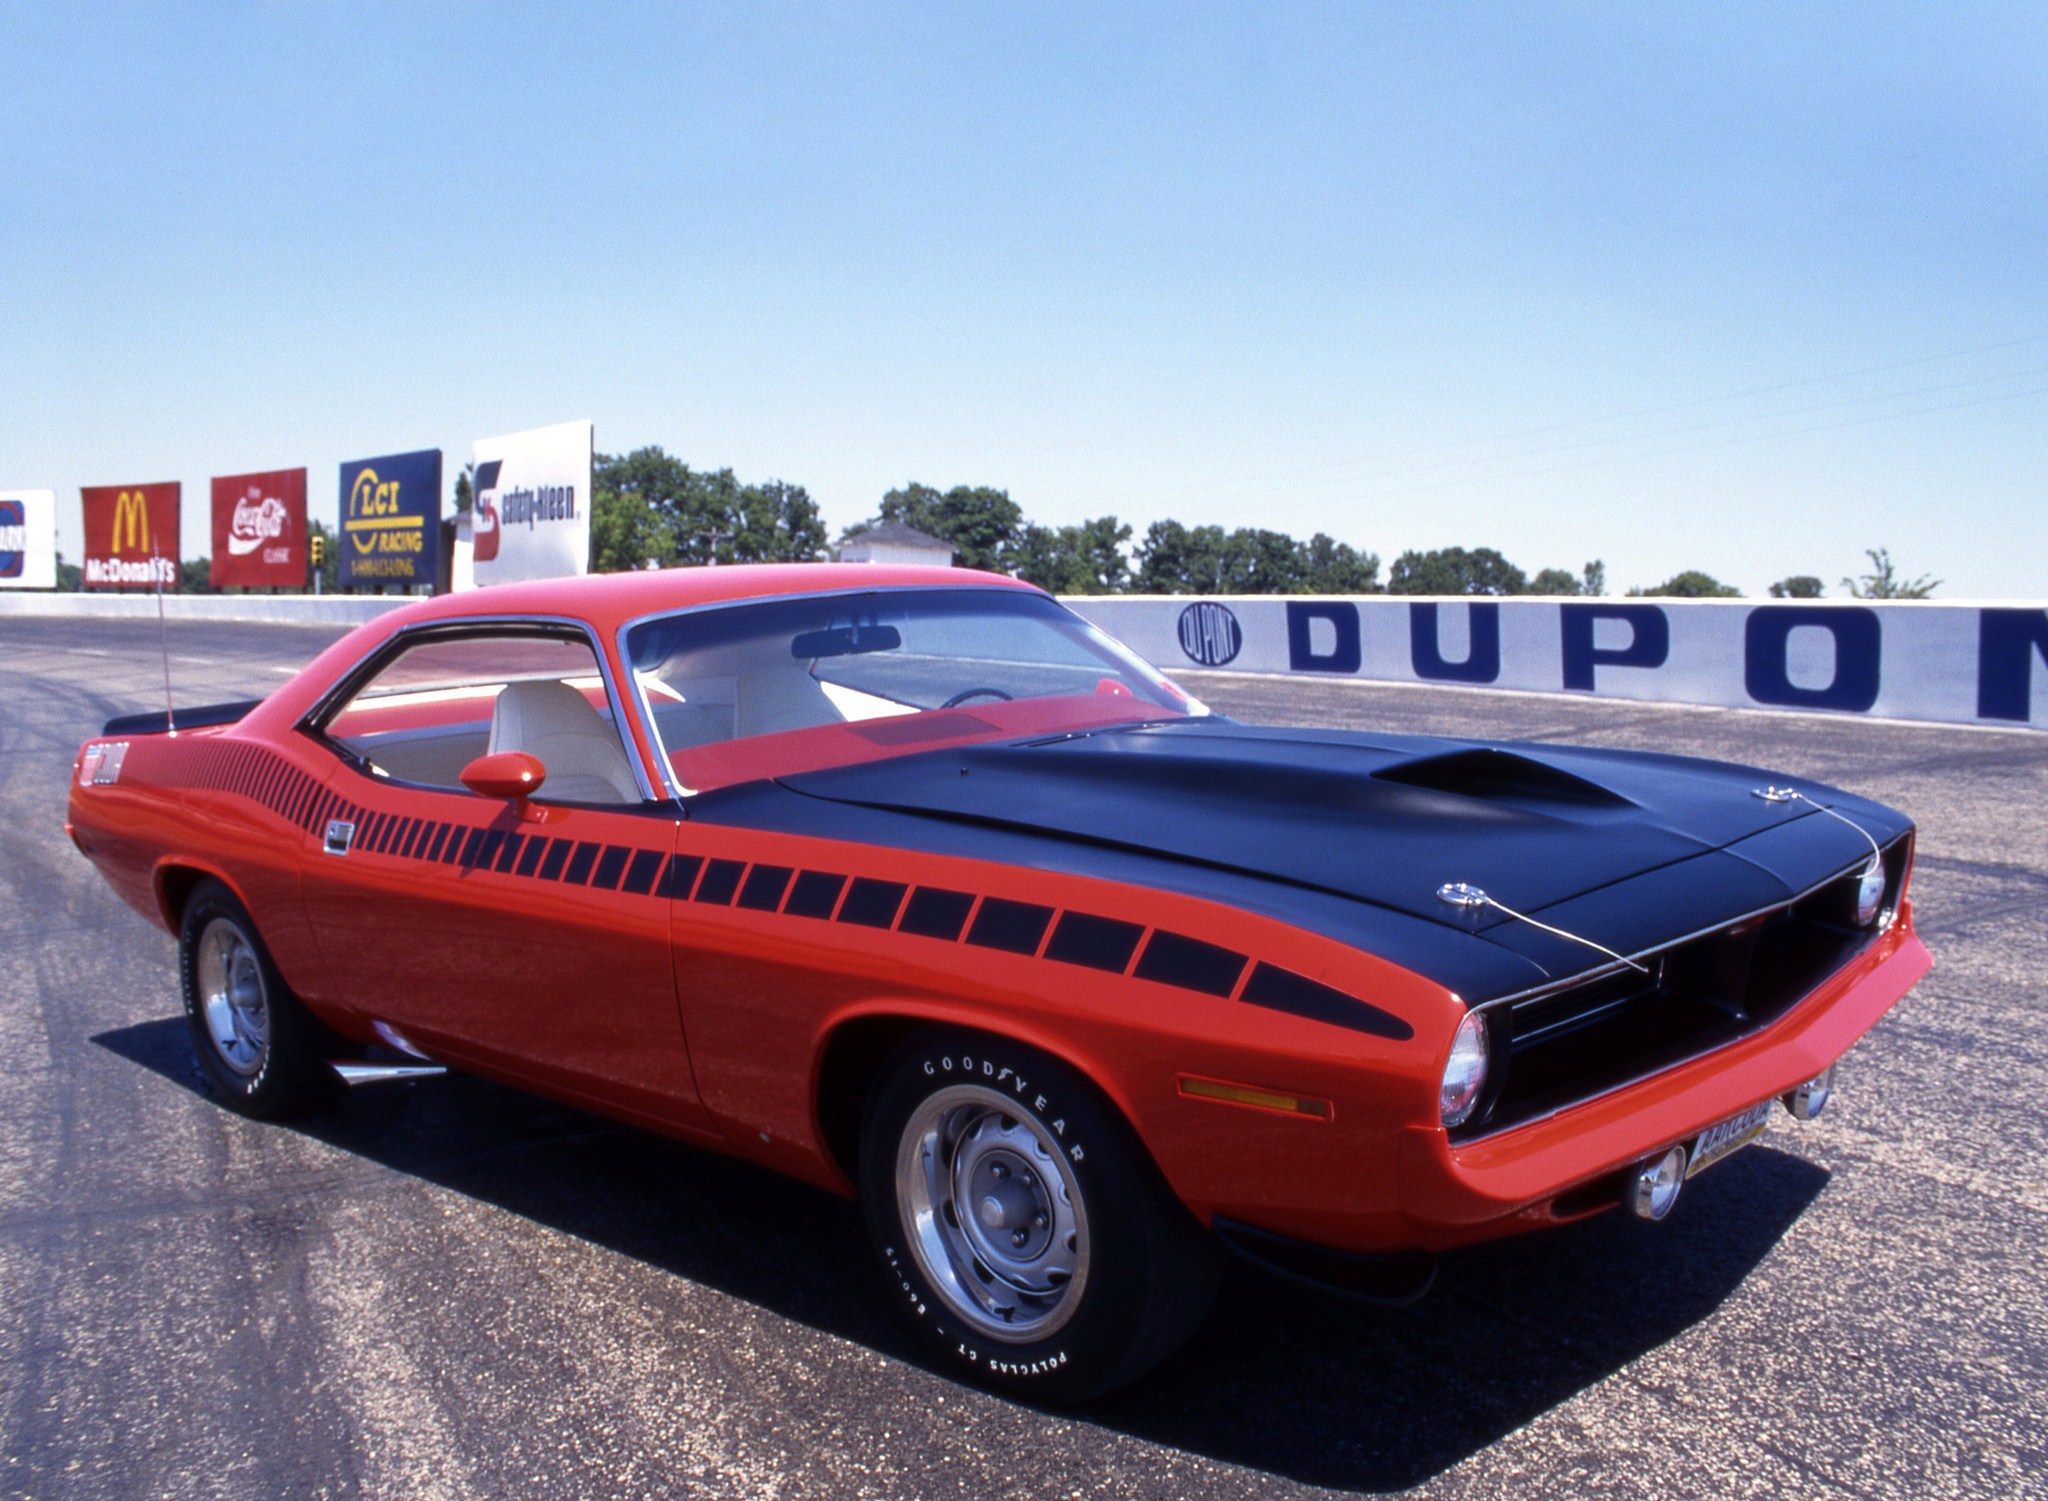 vehicles, plymouth barracuda, muscle car, plymouth